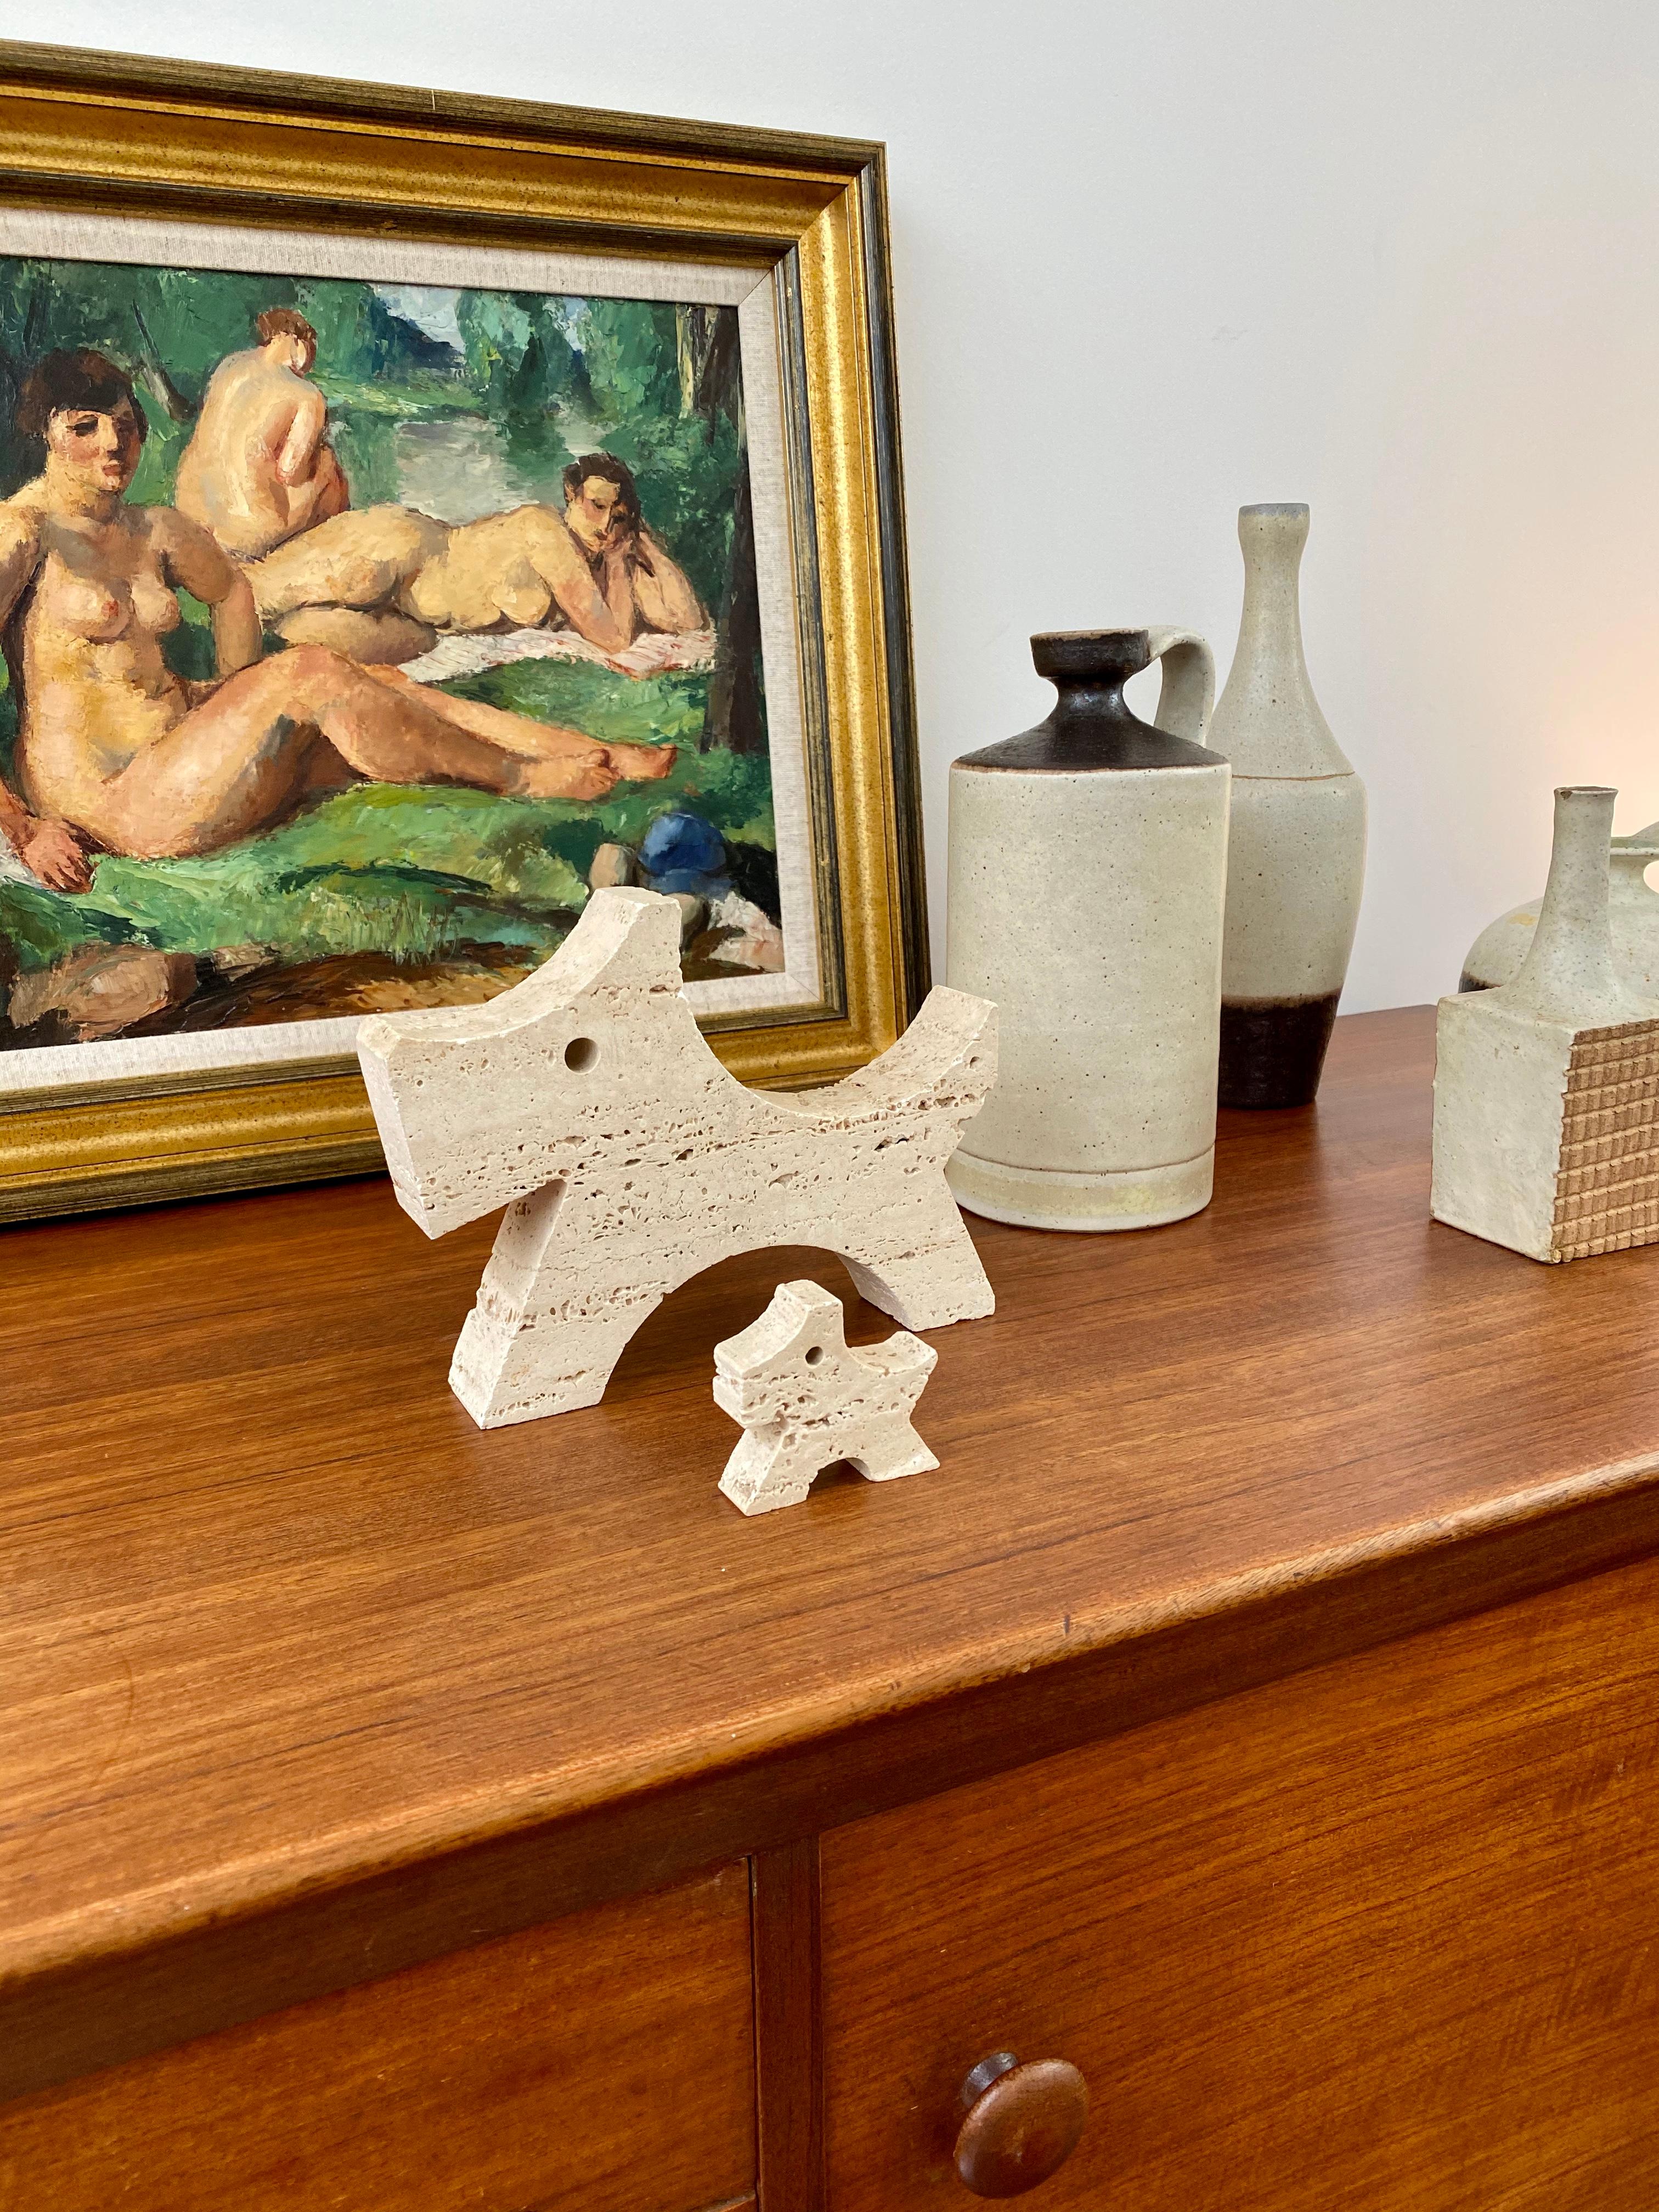 Pair of stylised travertine Scottish Terriers by Mannelli brothers (circa 1970s). Designed by Italians, Fratelli Mannelli, this charming set has loads of character and will delight collectors of beautiful objects. They are not only visually alluring